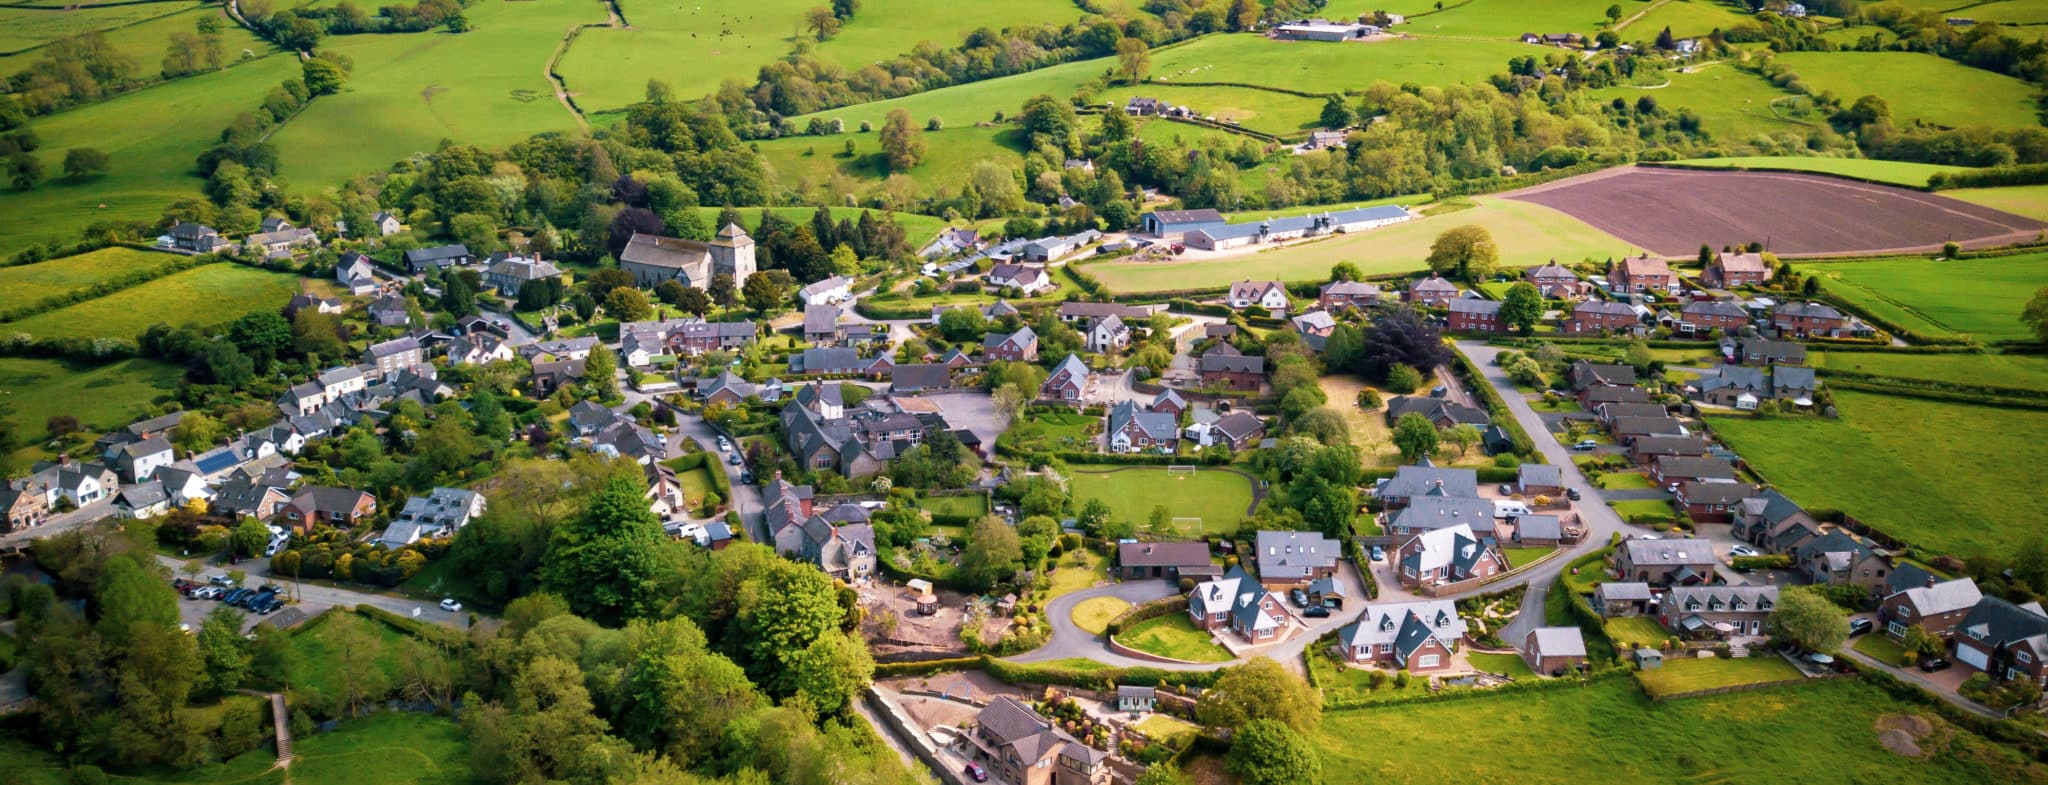 Aerial image of a village in the countryside 1 scaled